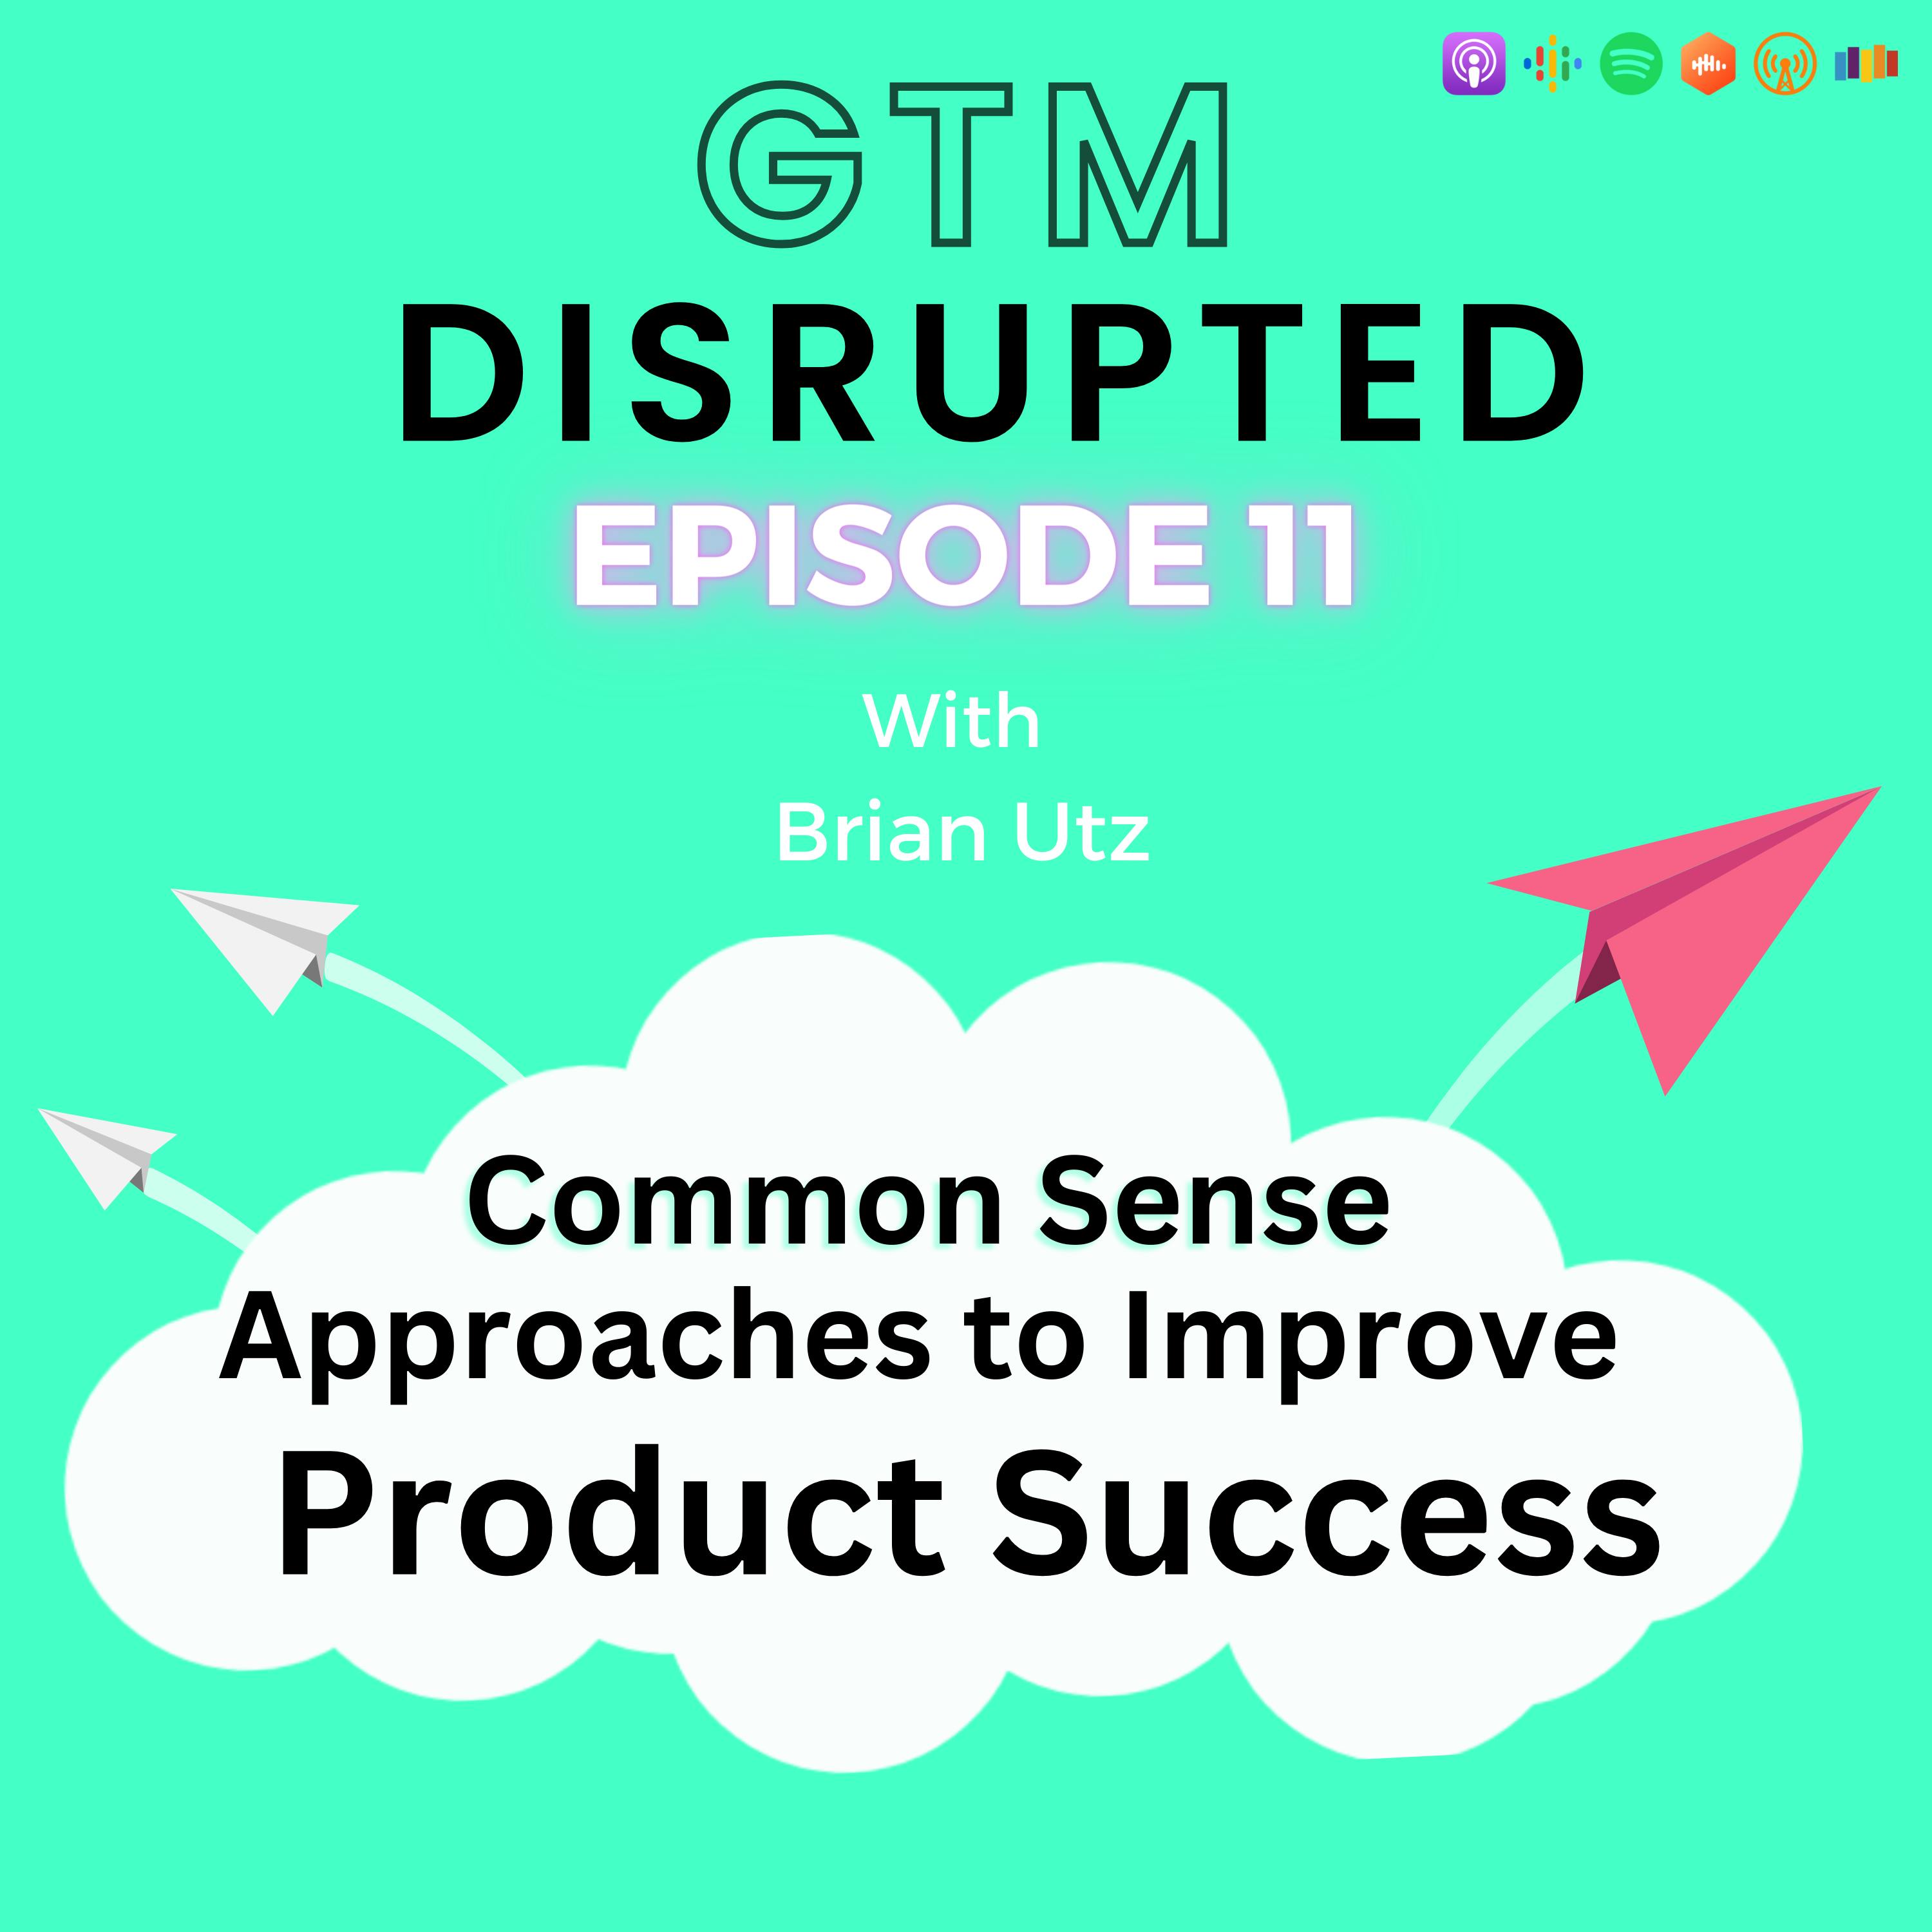 Common Sense Approaches to Improve Product Success